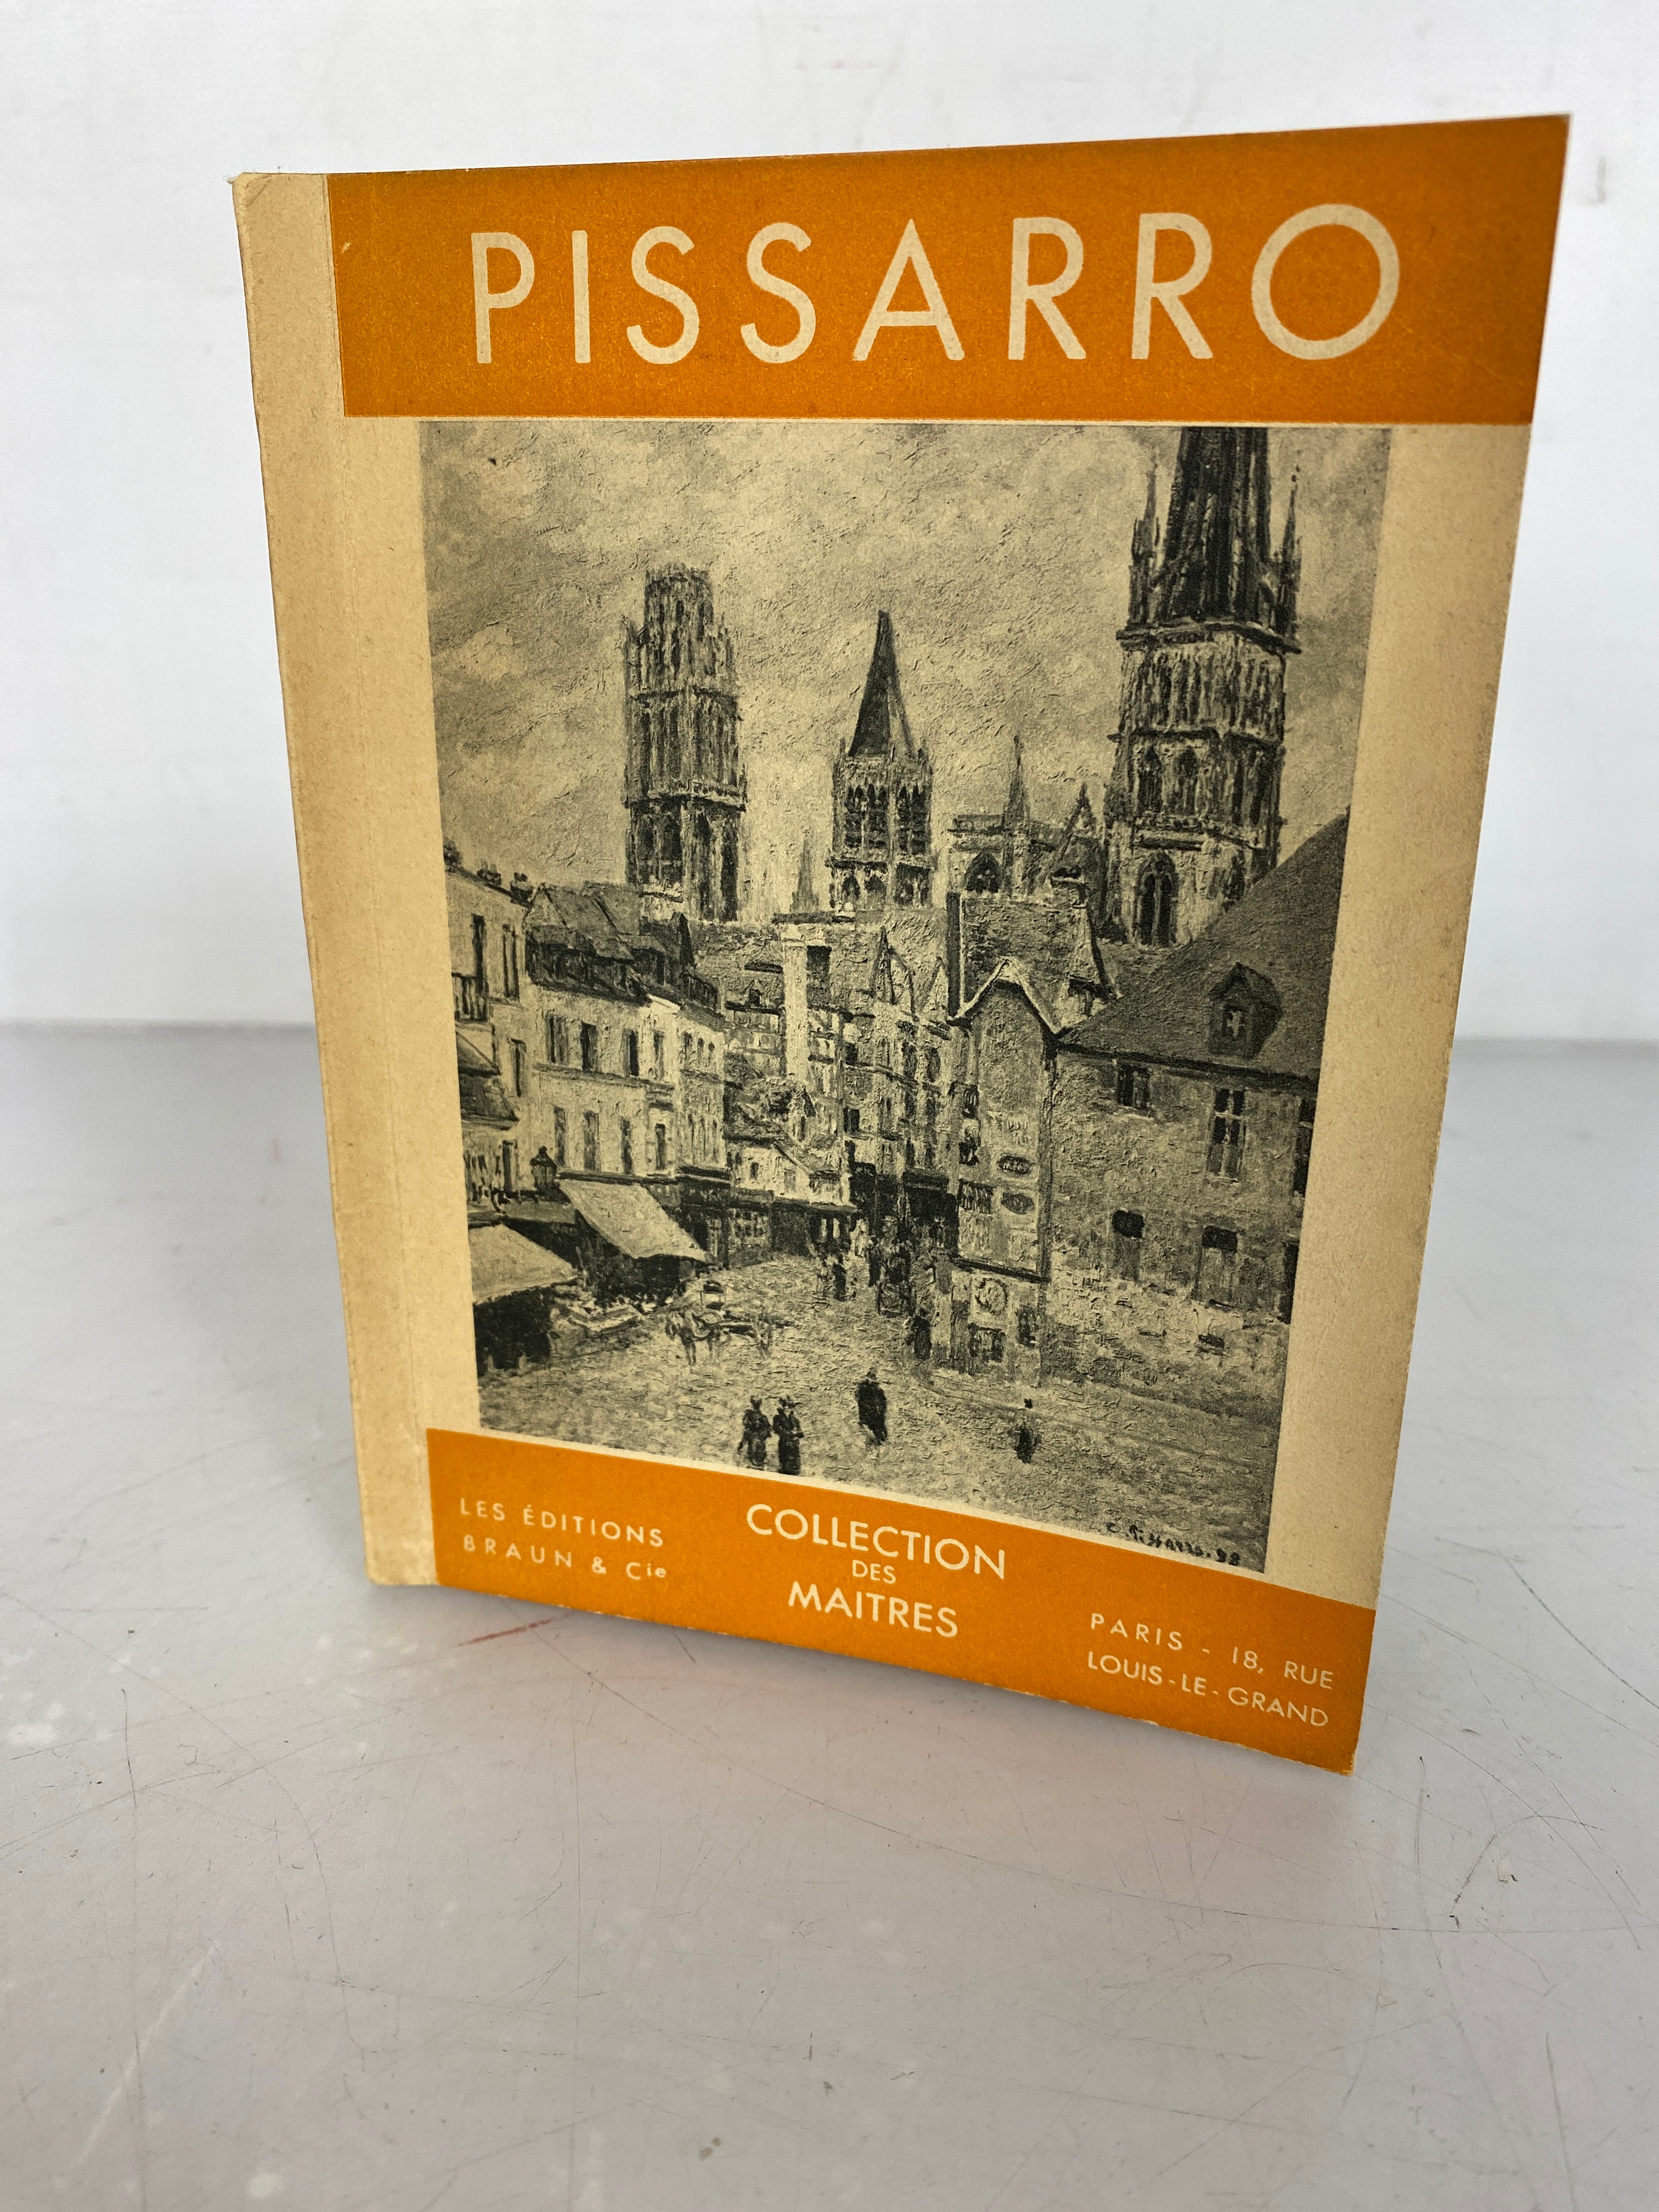 Lot of 2 Camille Pissarro (in French) and Pablo Picasso (in German) c1950-1960s